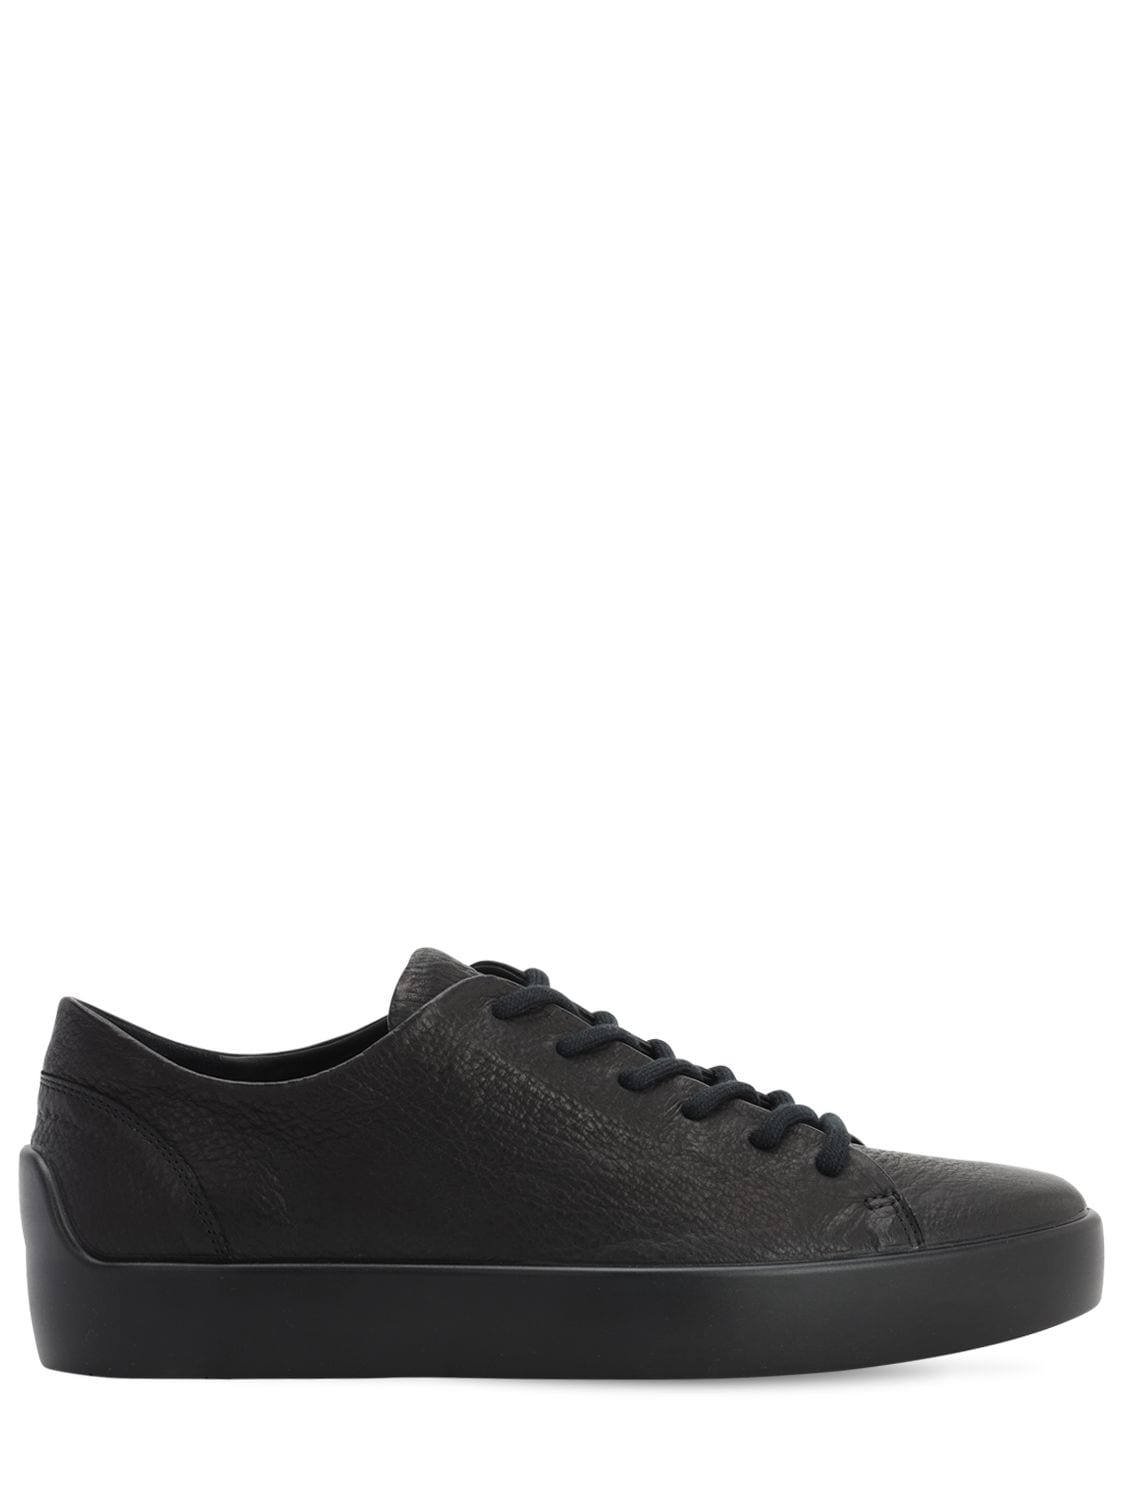 The Last Conspiracy Ecco Eik Waxed Leather Sneakers In Black